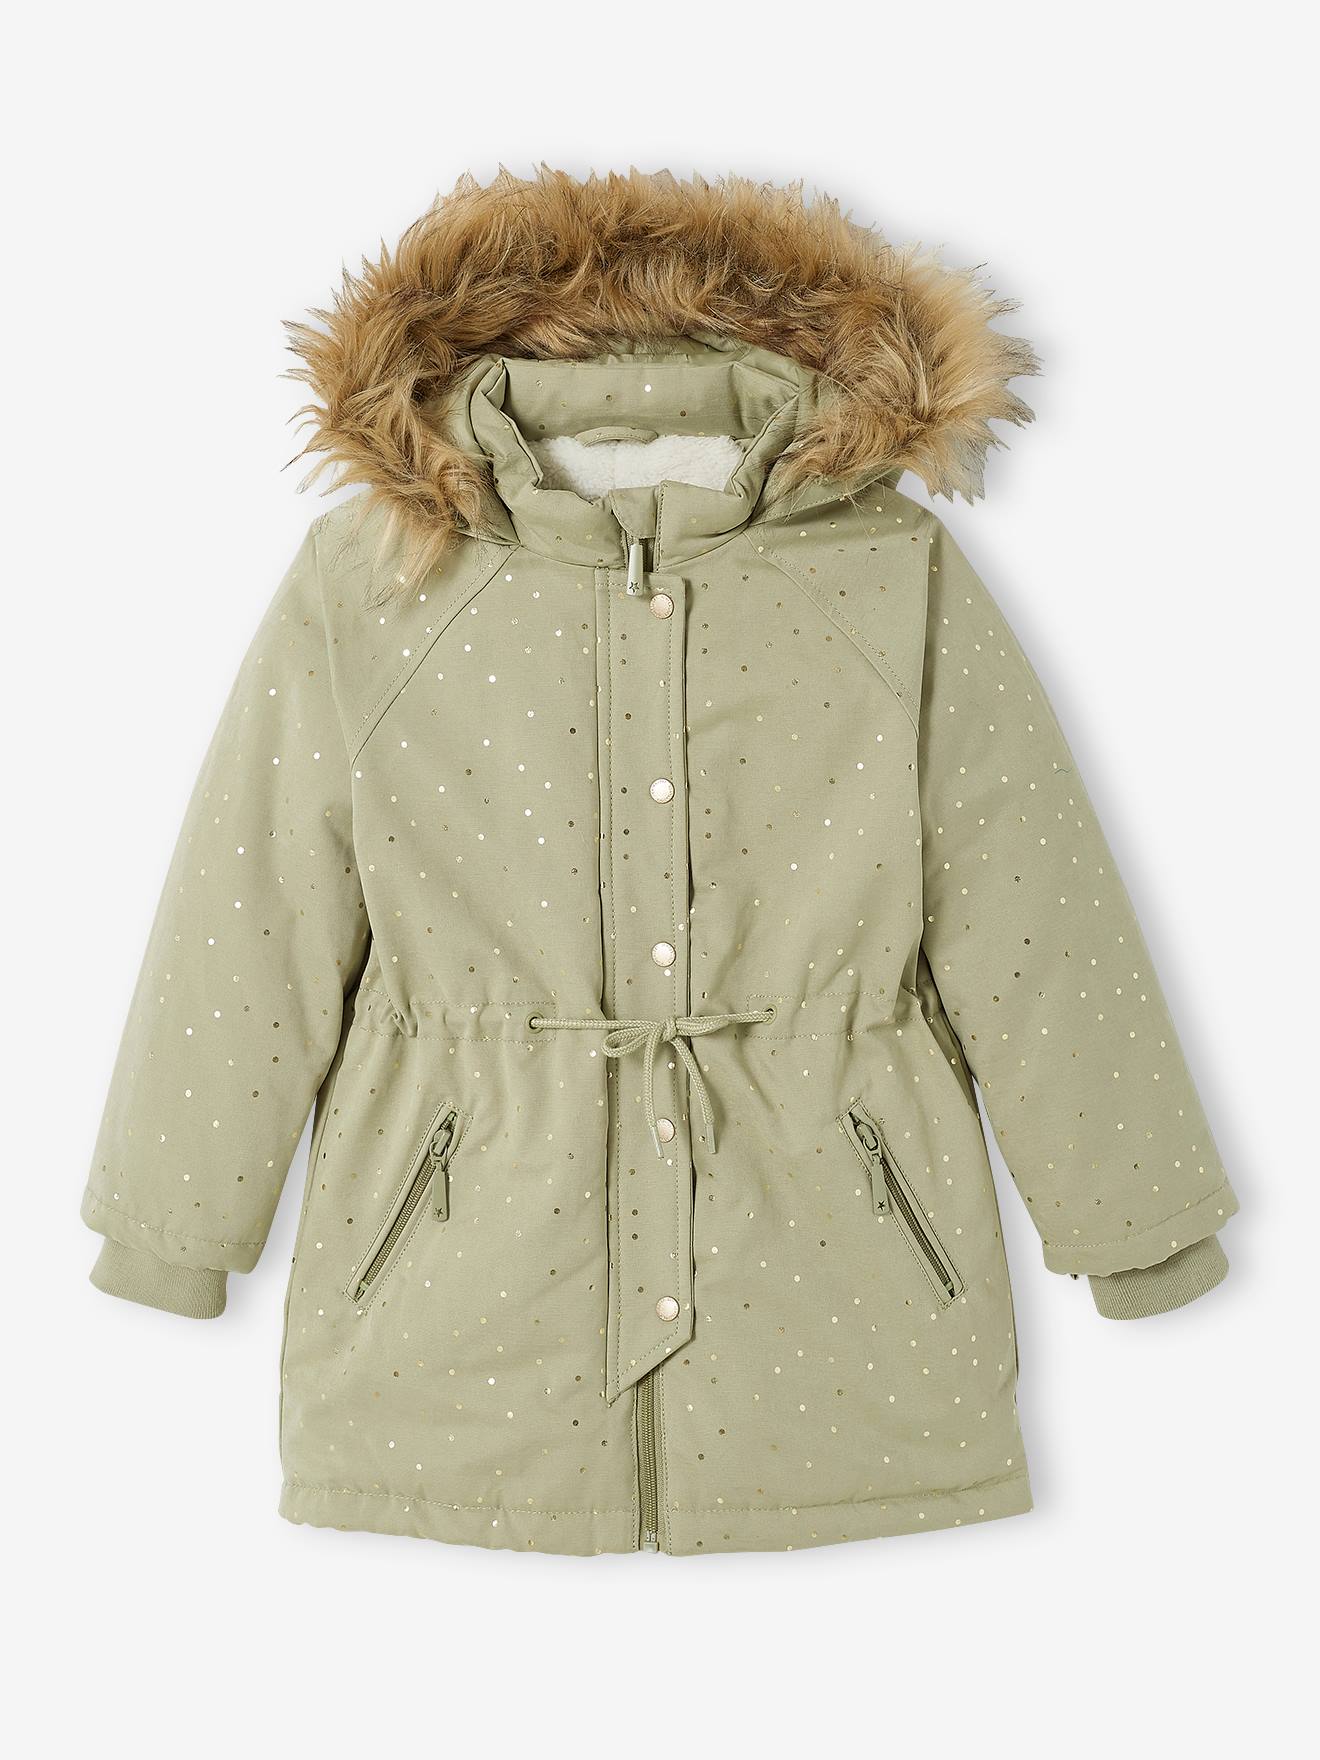 Hooded Parka with Iridescent Dots, Recycled Polyester Padding, for Girls -  green medium all over printed, Girls